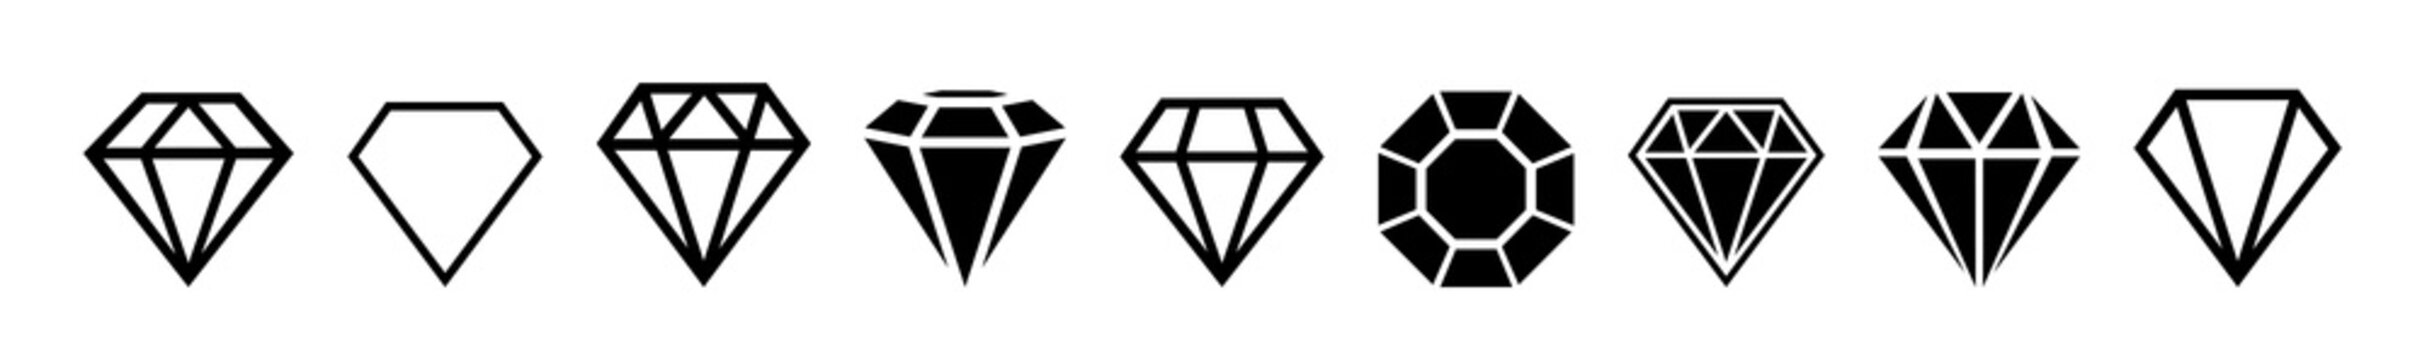 A set of diamonds in a flat style